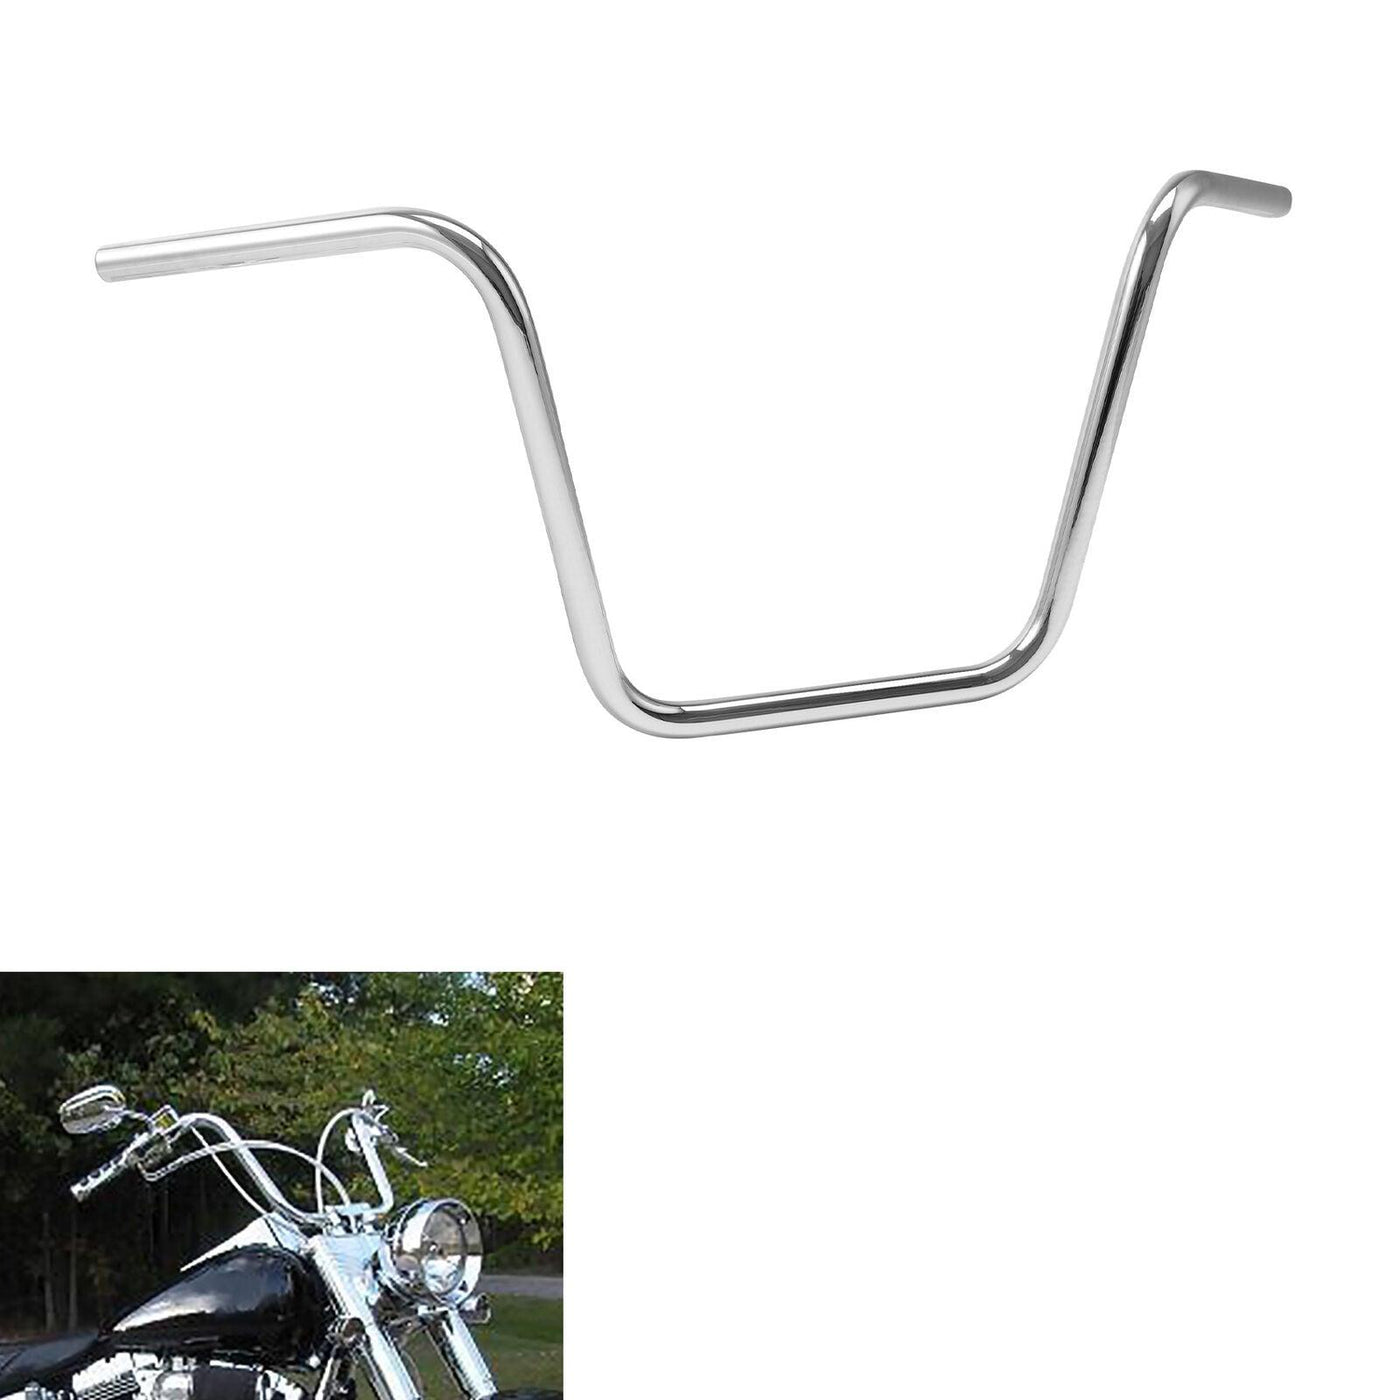 14" Rise Ape Hanger Bar Handlebar Fit For Harley Softail Sportster 883 1200 48 - Moto Life Products